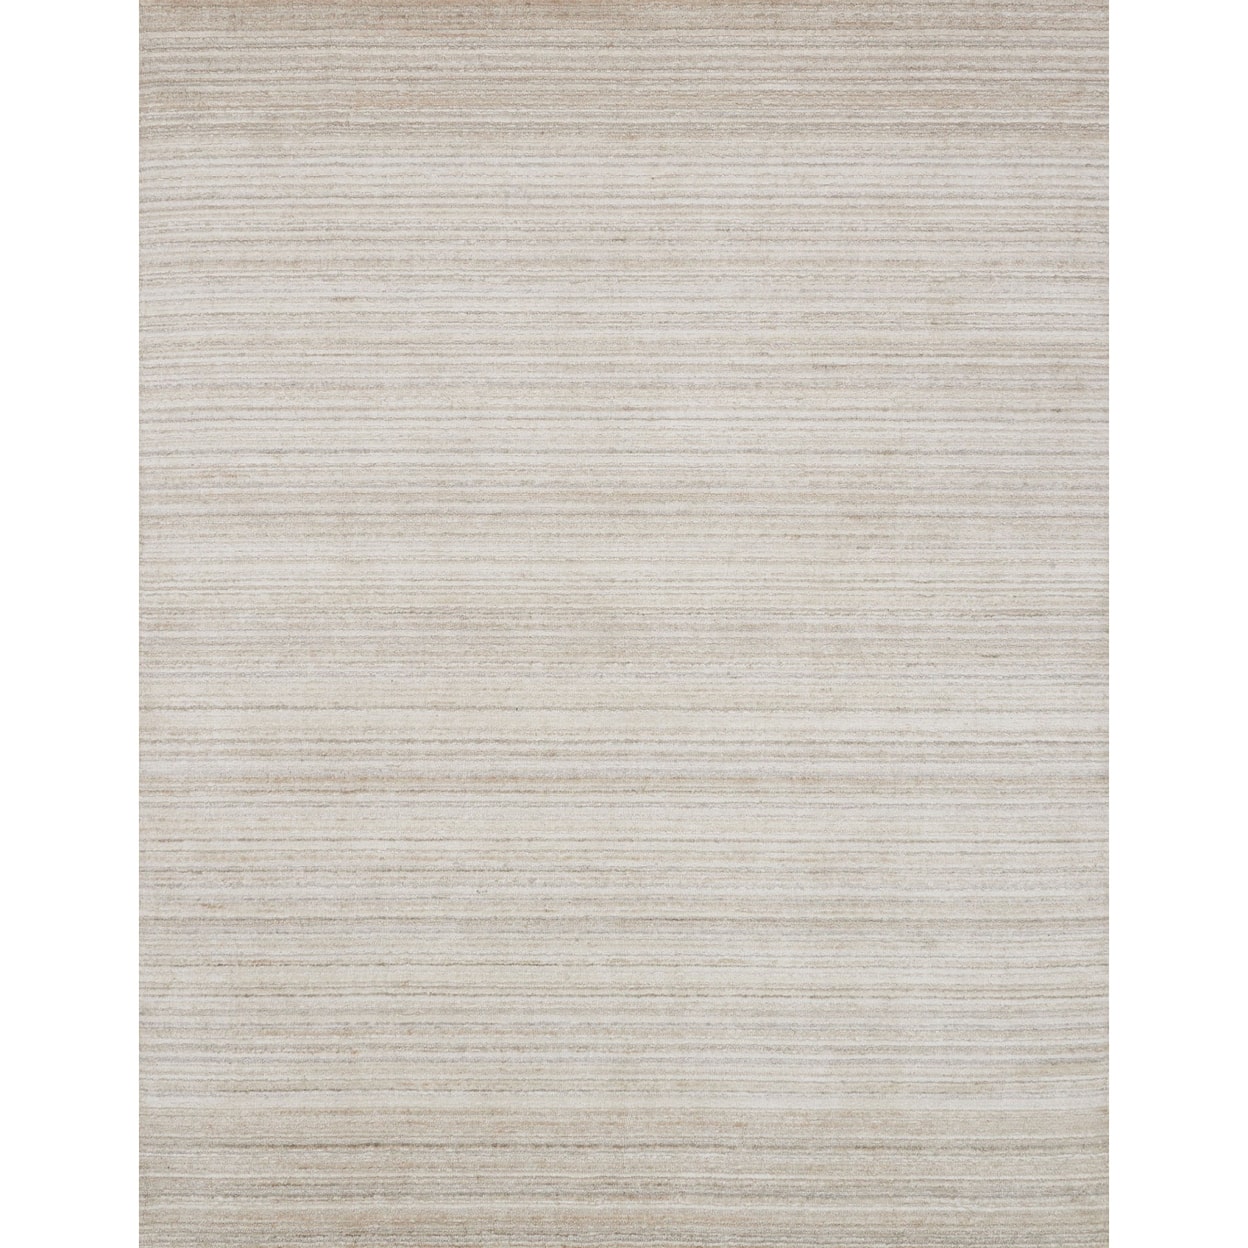 Reeds Rugs Haven 2'-0" x 3'-0" Area Rug